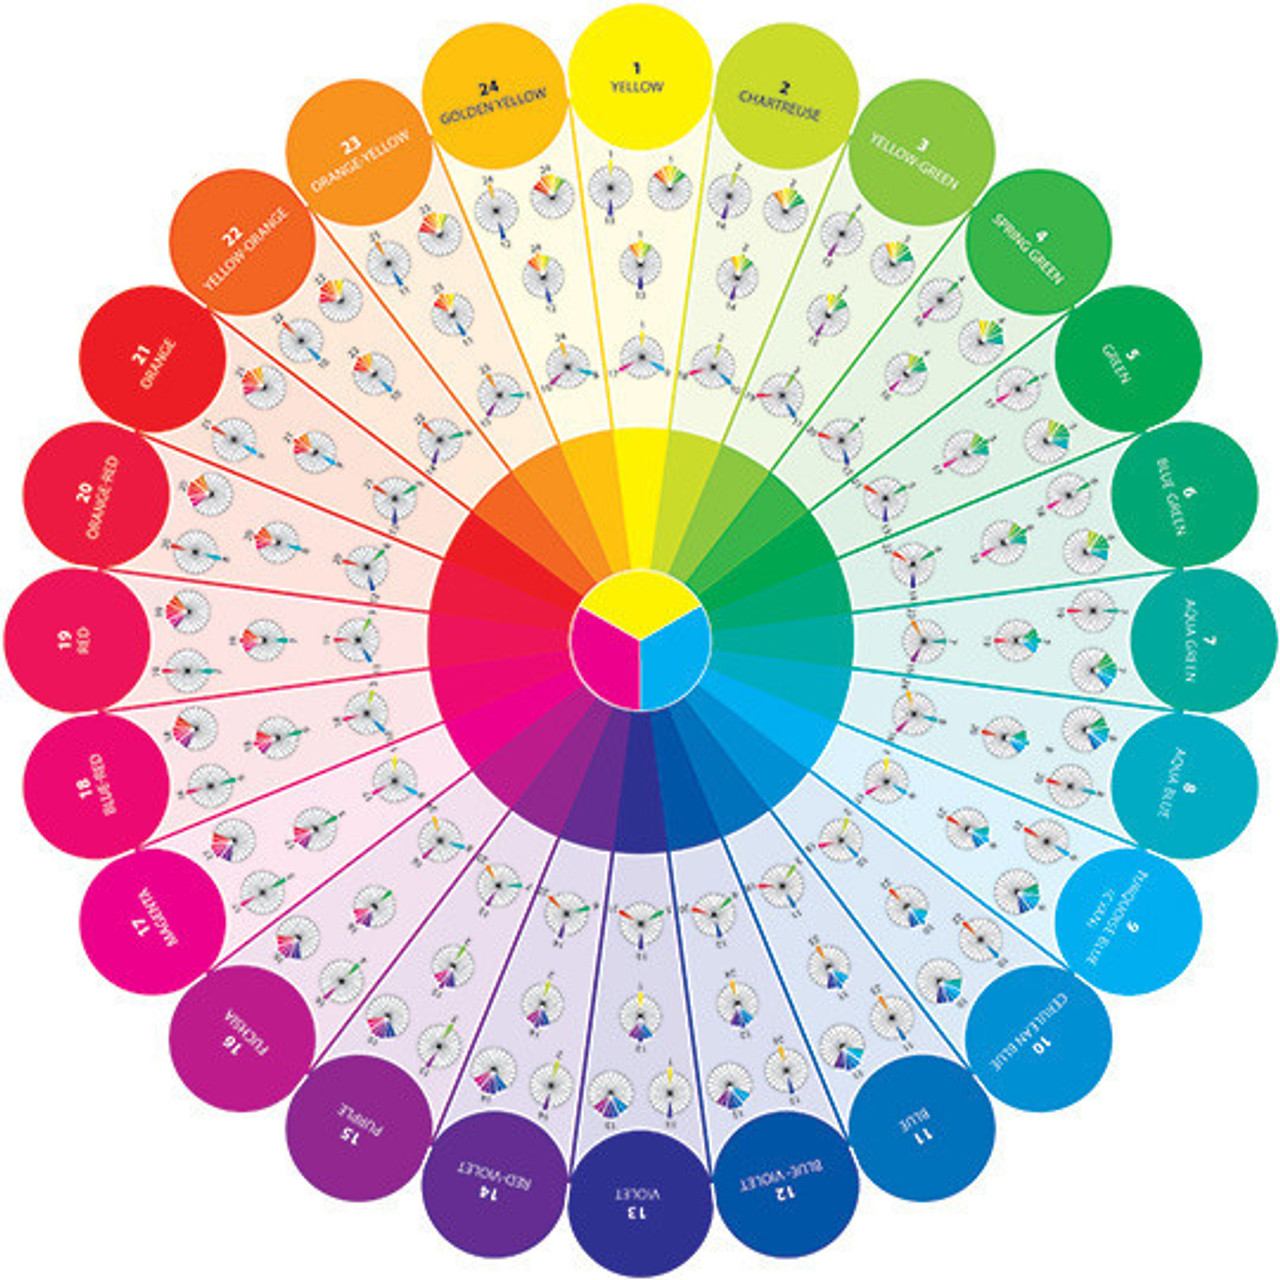 Analogous Colors and Color Wheel. Colours signify Life. Areas on